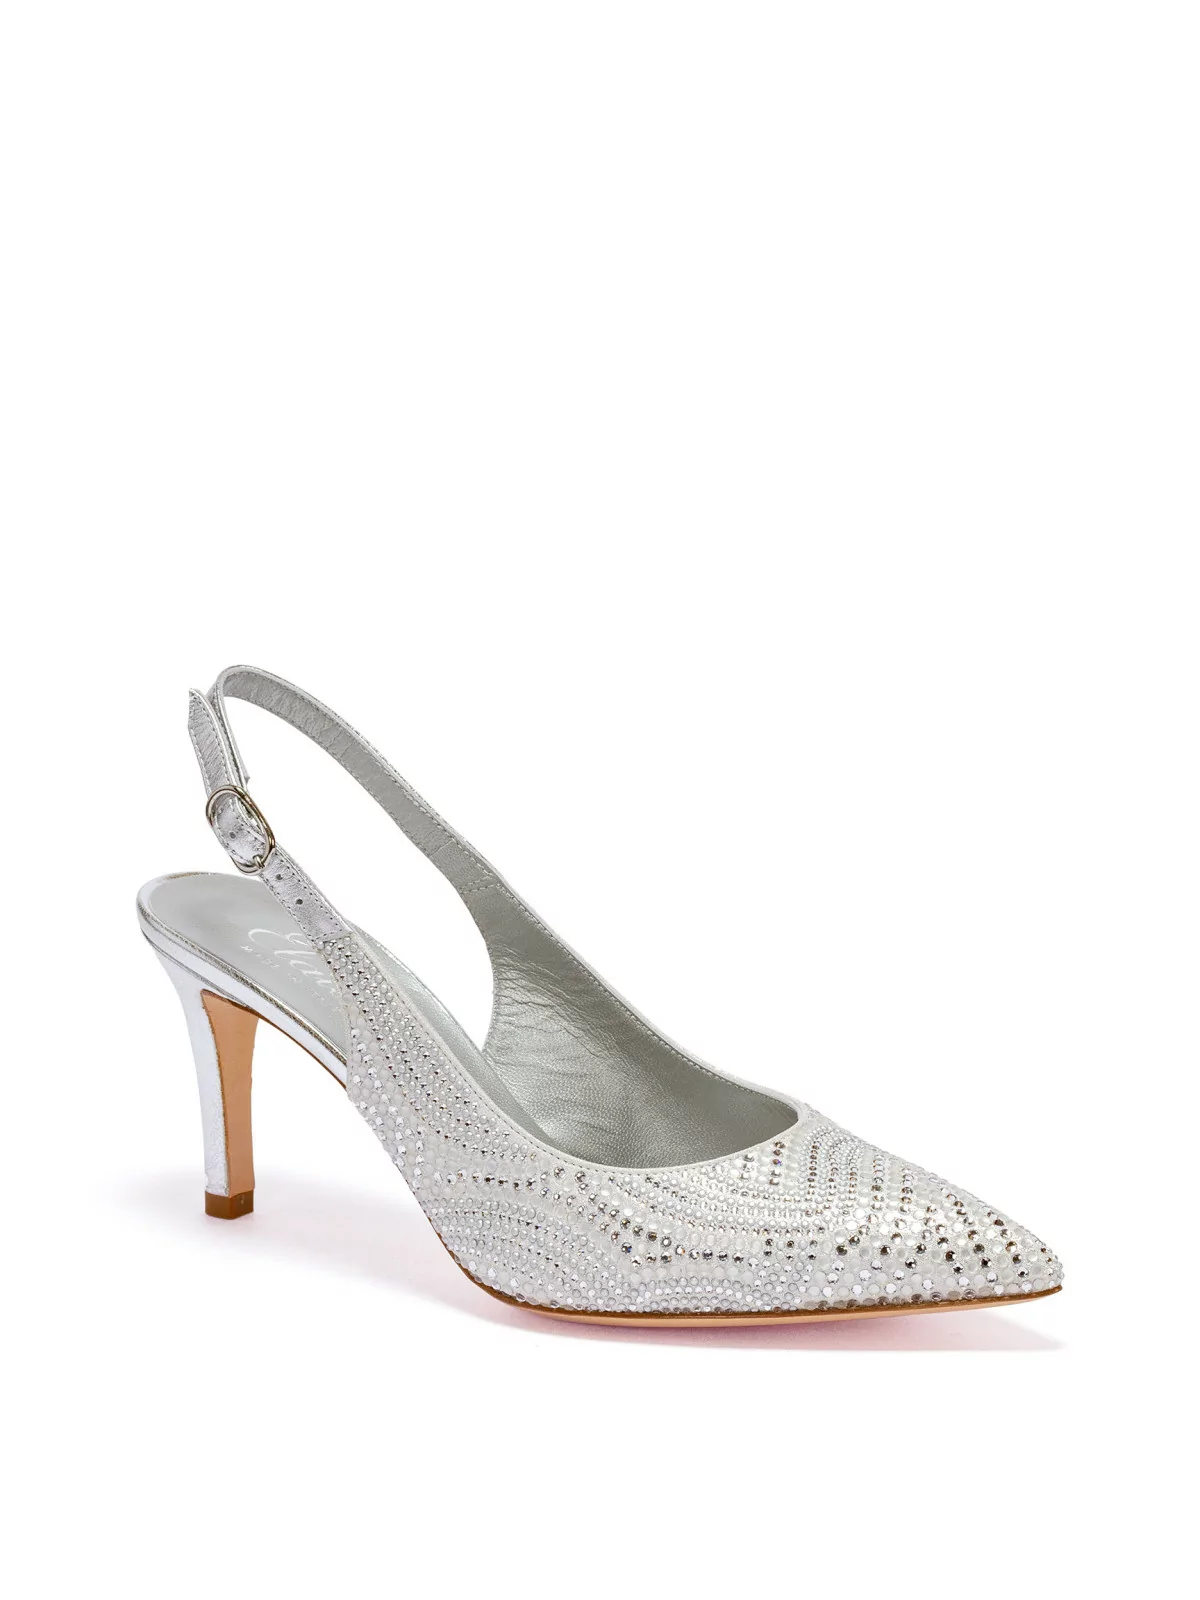 Silver laminate leather and suede slingback with rhinestones and microstuds deta